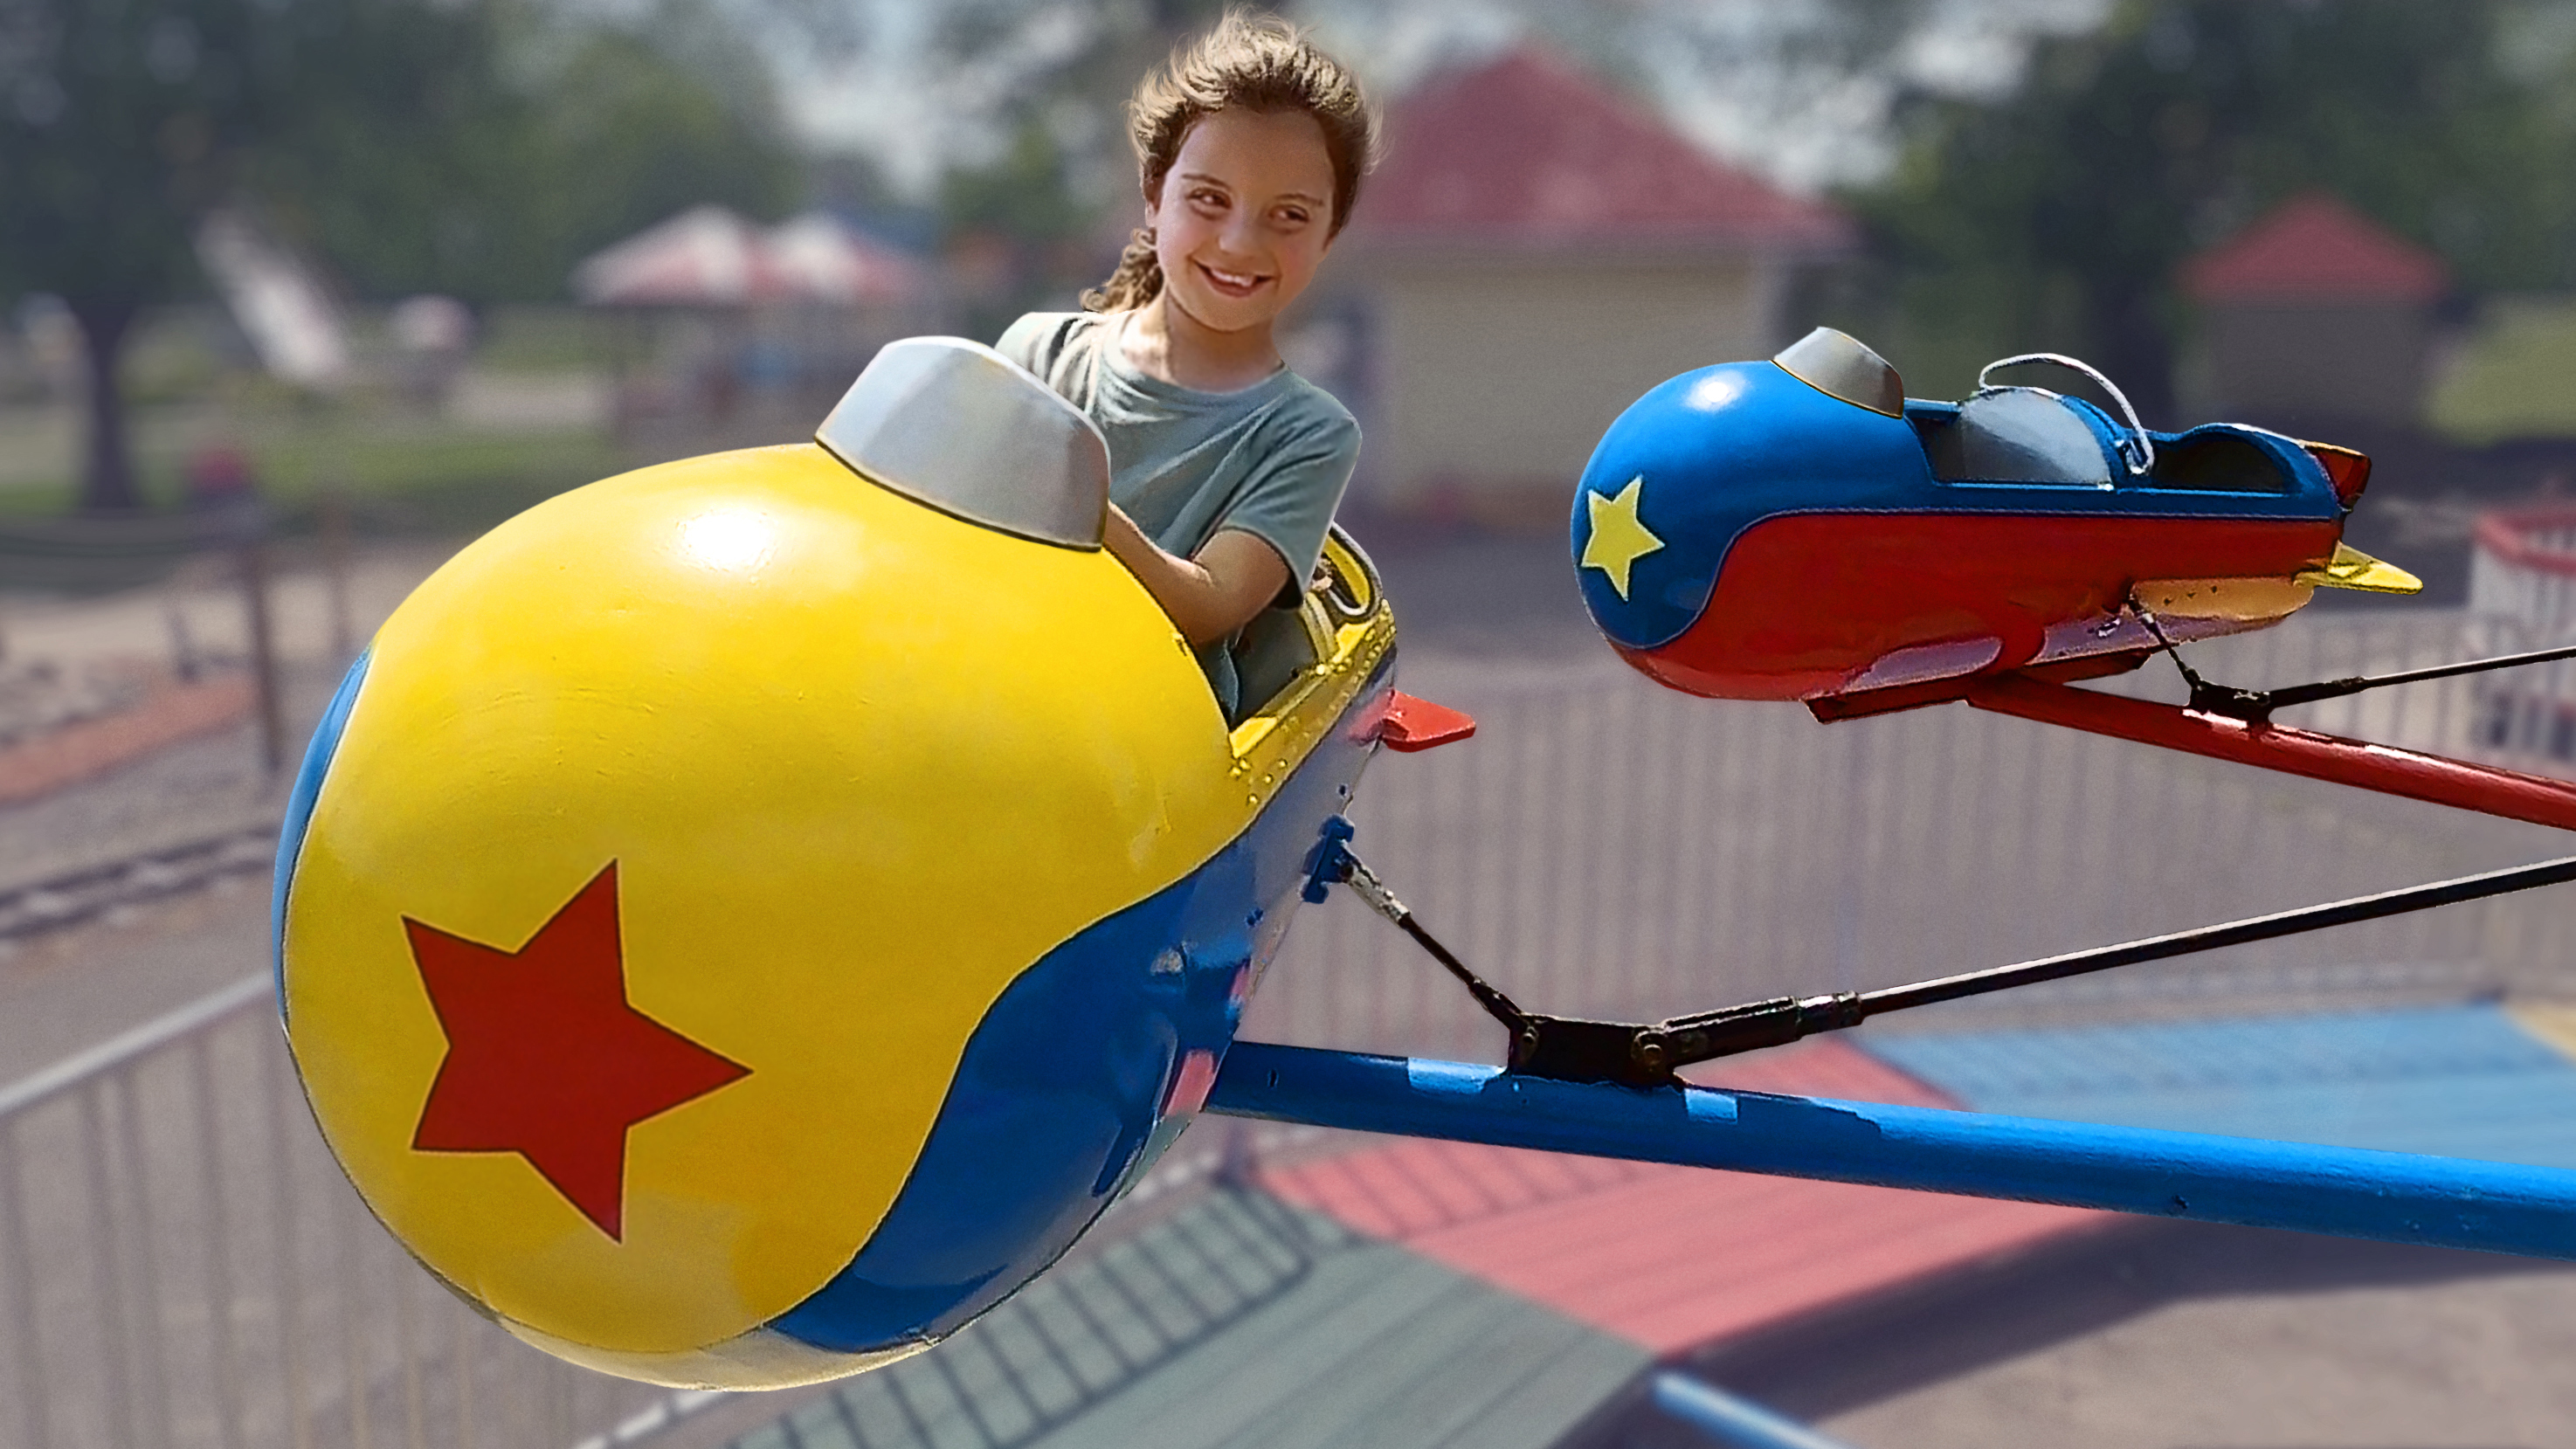 Sky Fighter Ride at Midway Park. Credit: Peter Daulton.